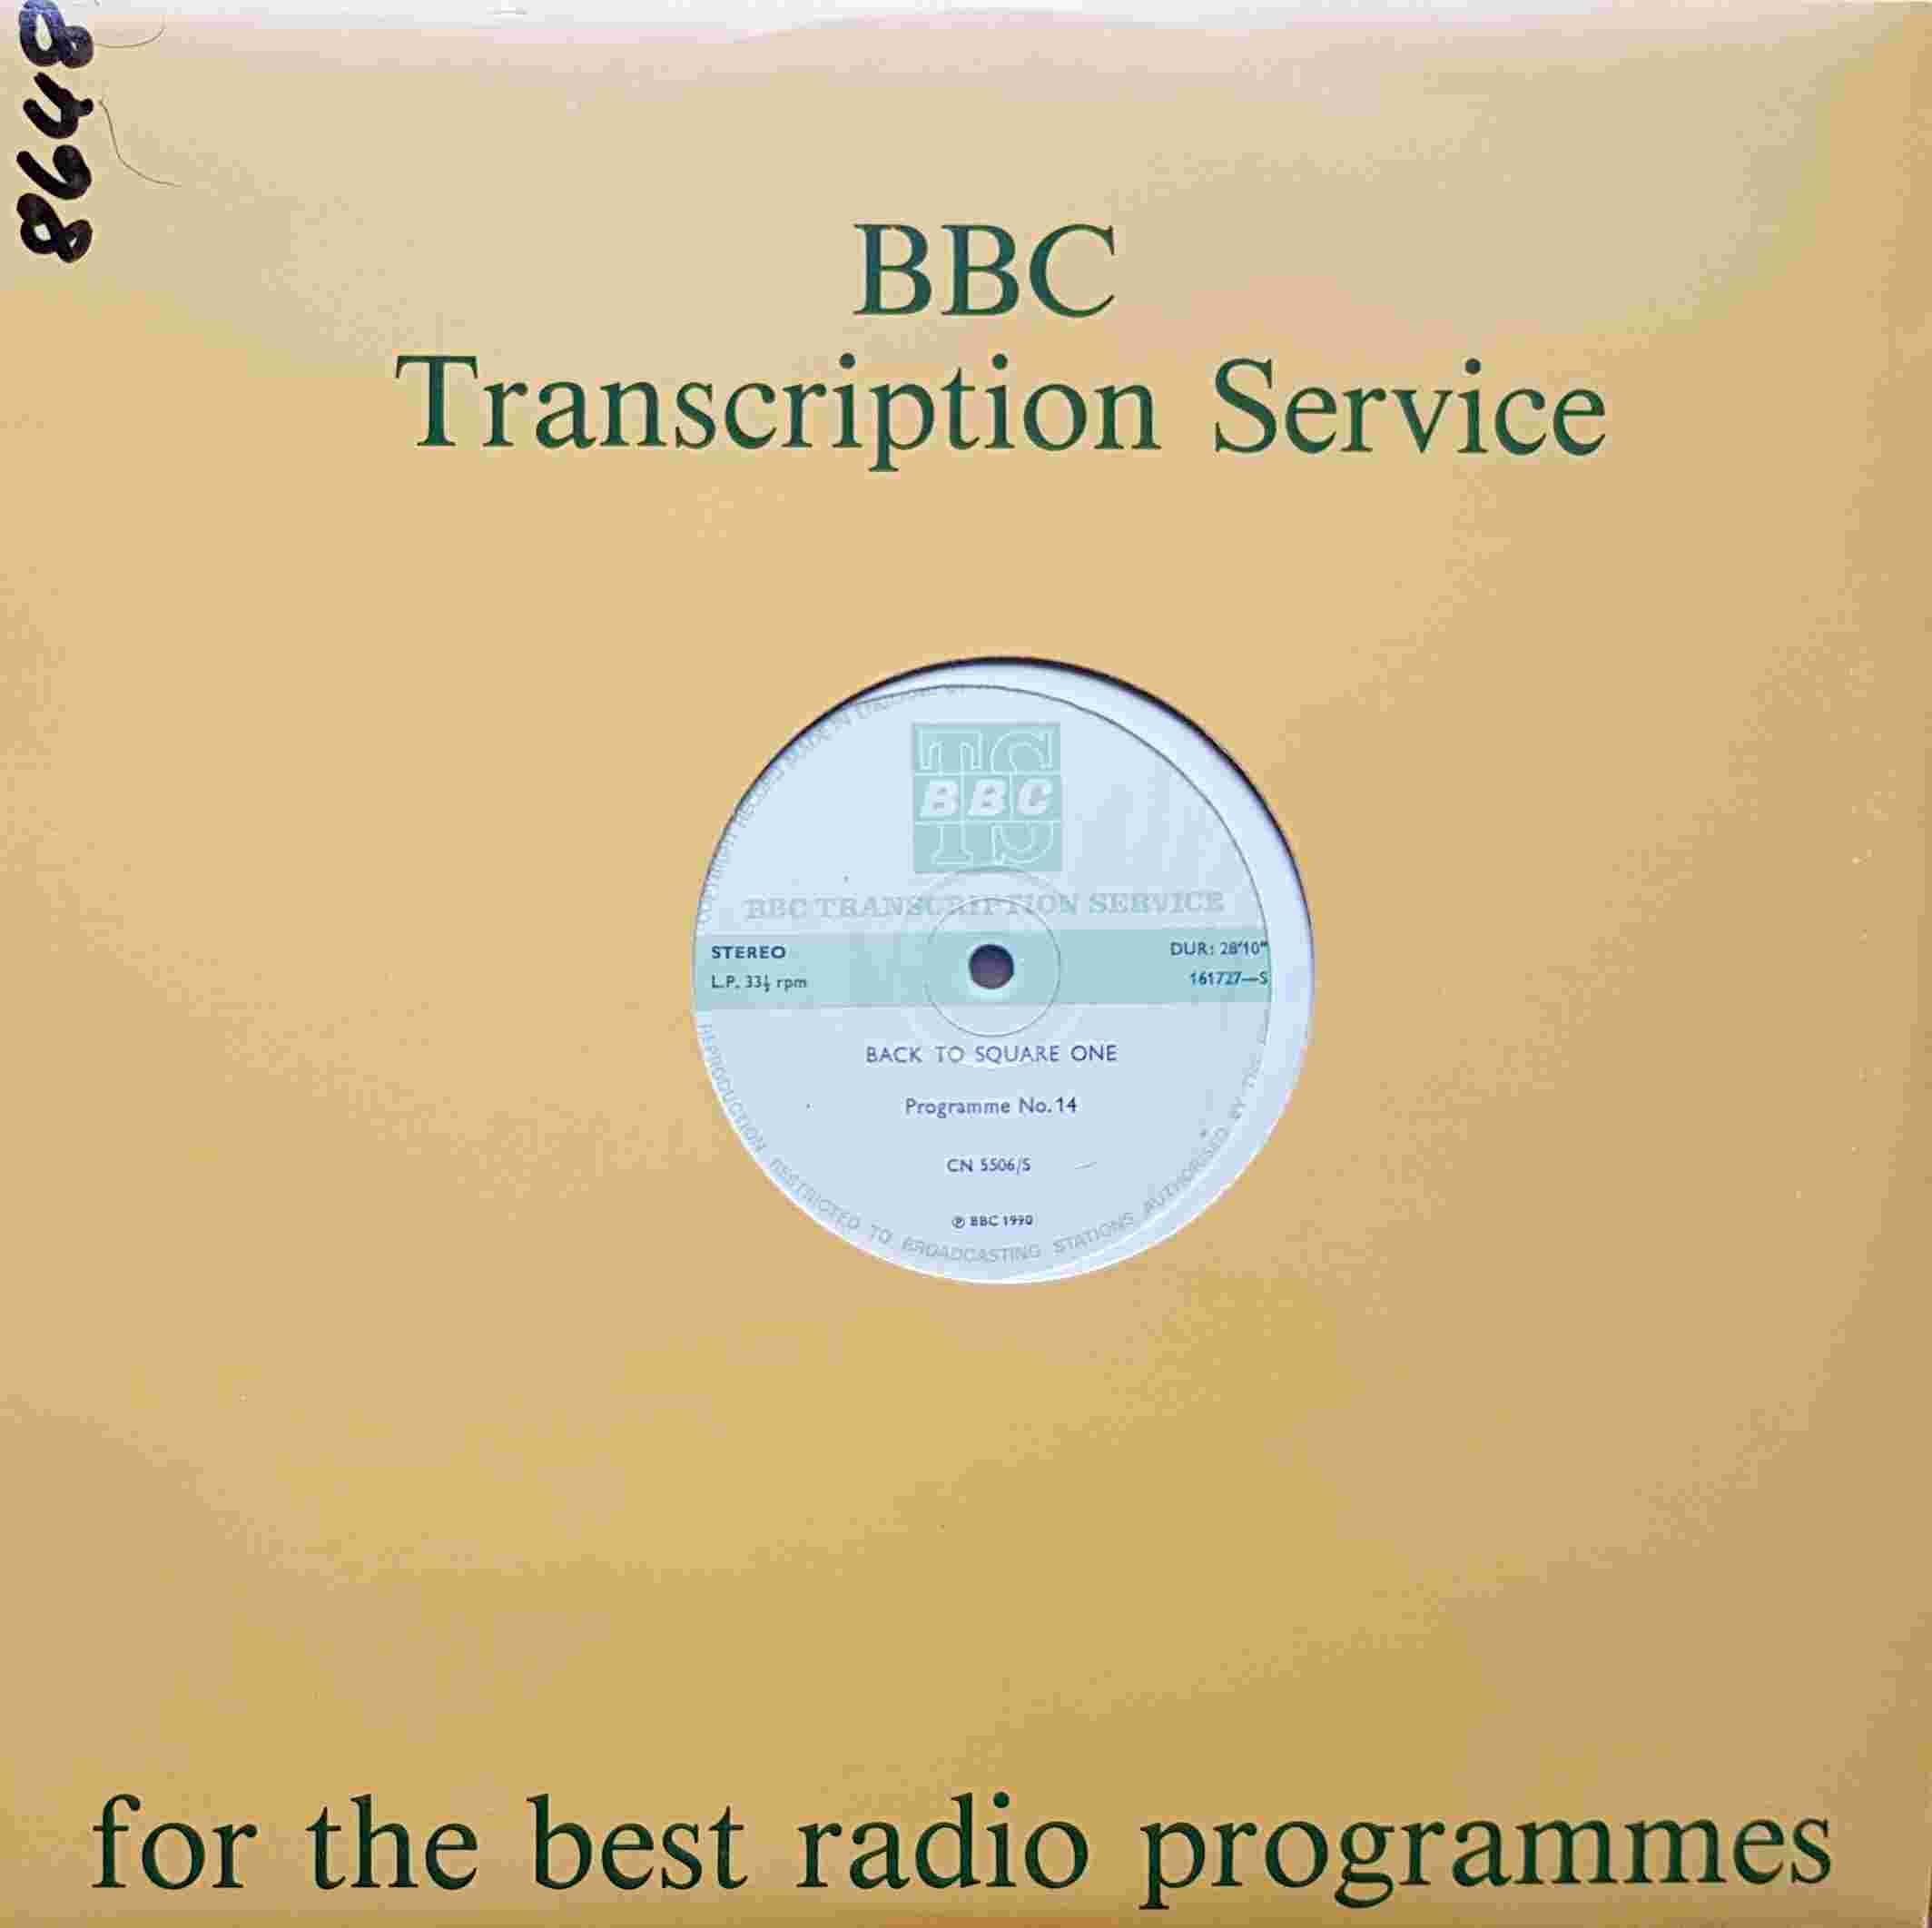 Picture of CN 5506 S 7 Back to square one - Programme 13 & 14 by artist Chris Serle from the BBC records and Tapes library